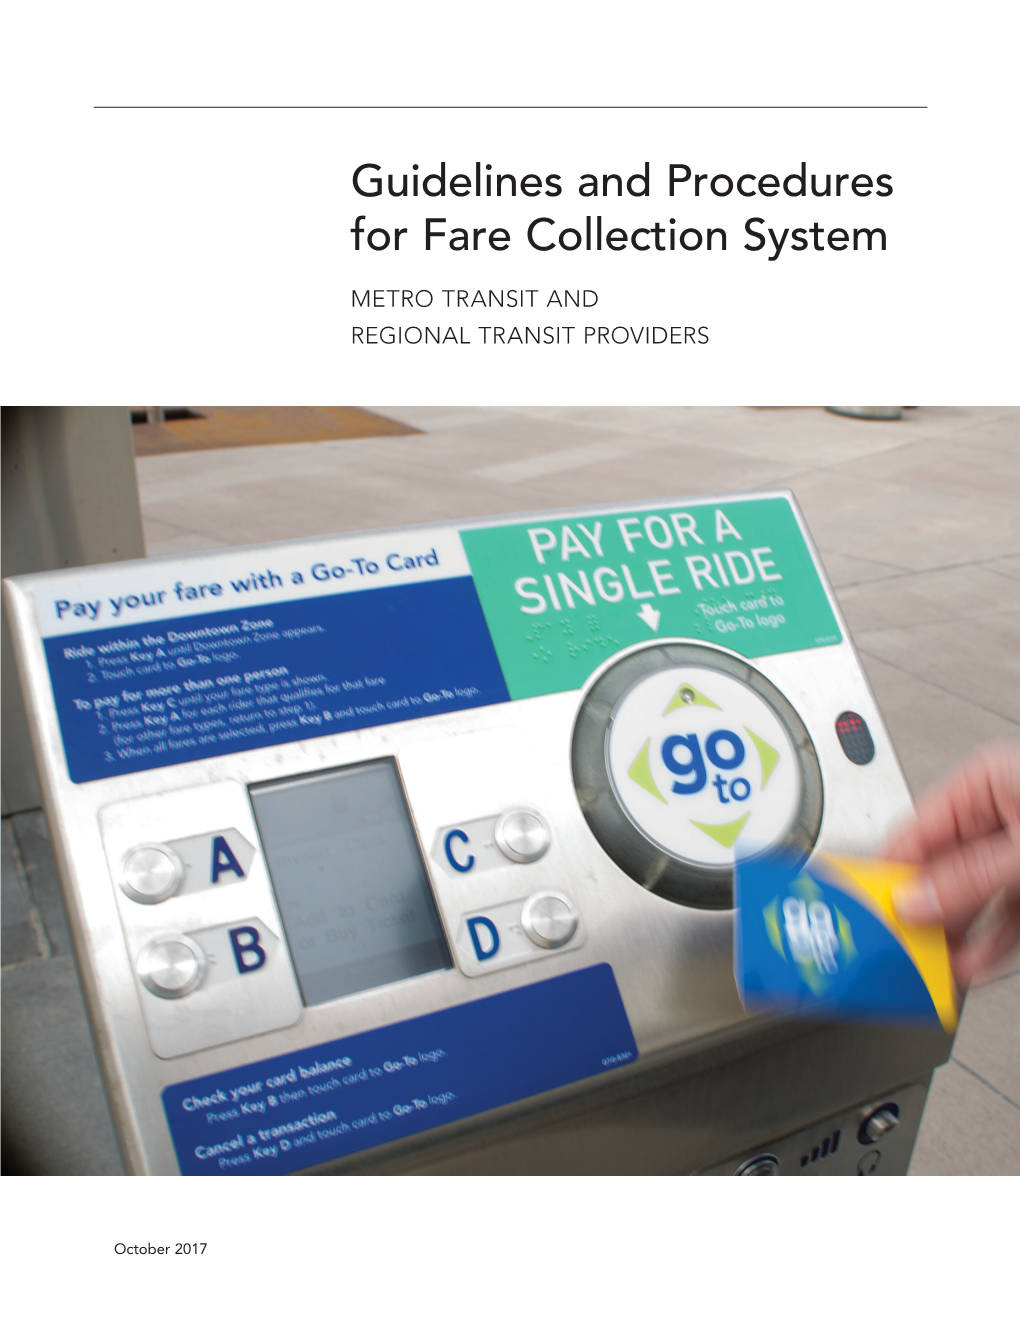 Guidelines and Procedures for Fare Collection System